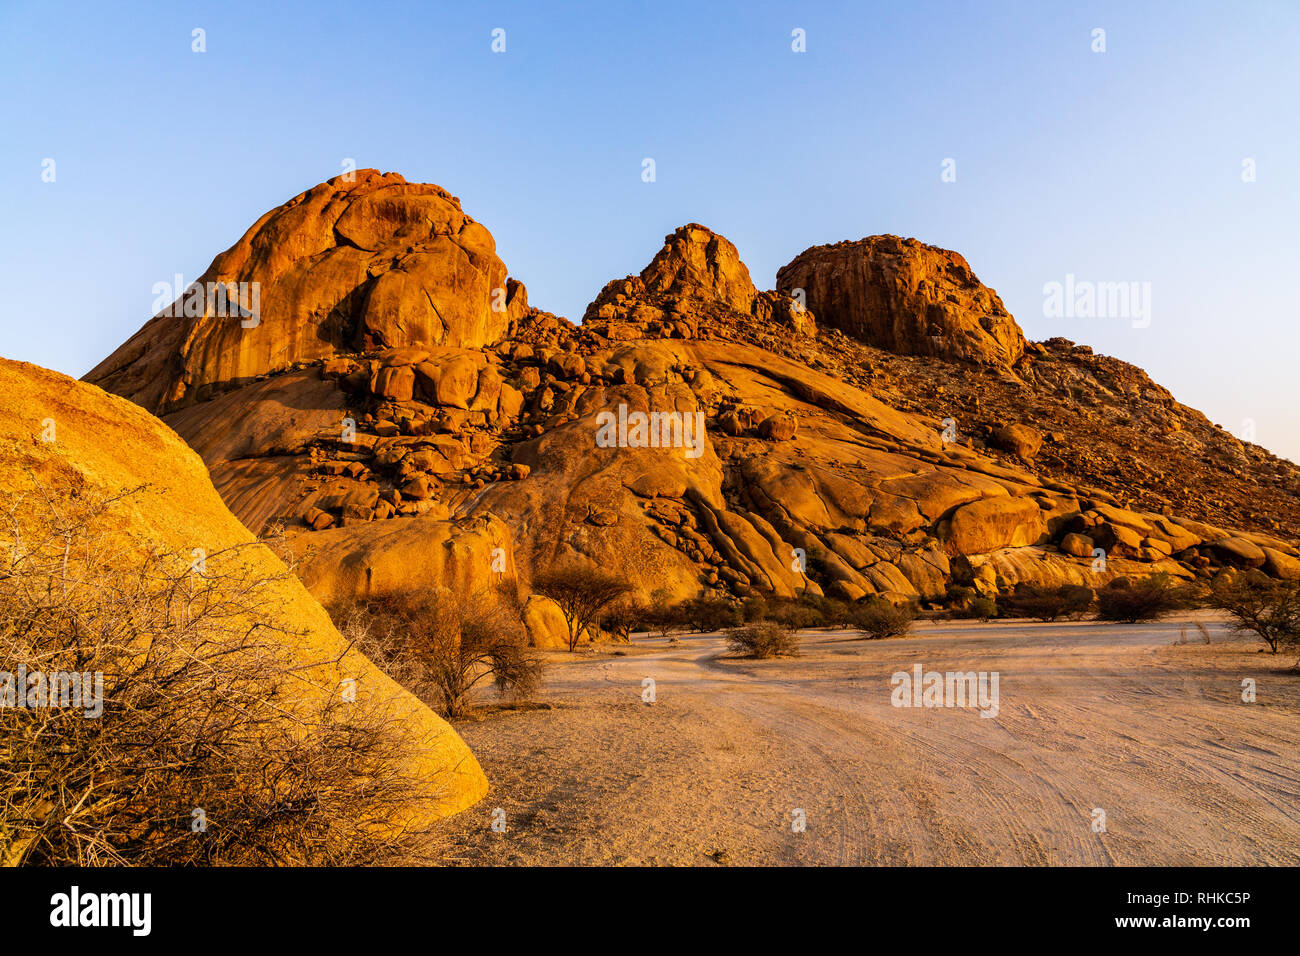 Nature reserve Spitzkoppe. The picturesque stone arches painted in red and orange. Evening sun lengthens the shadows among the rocks roadtrip Stock Photo